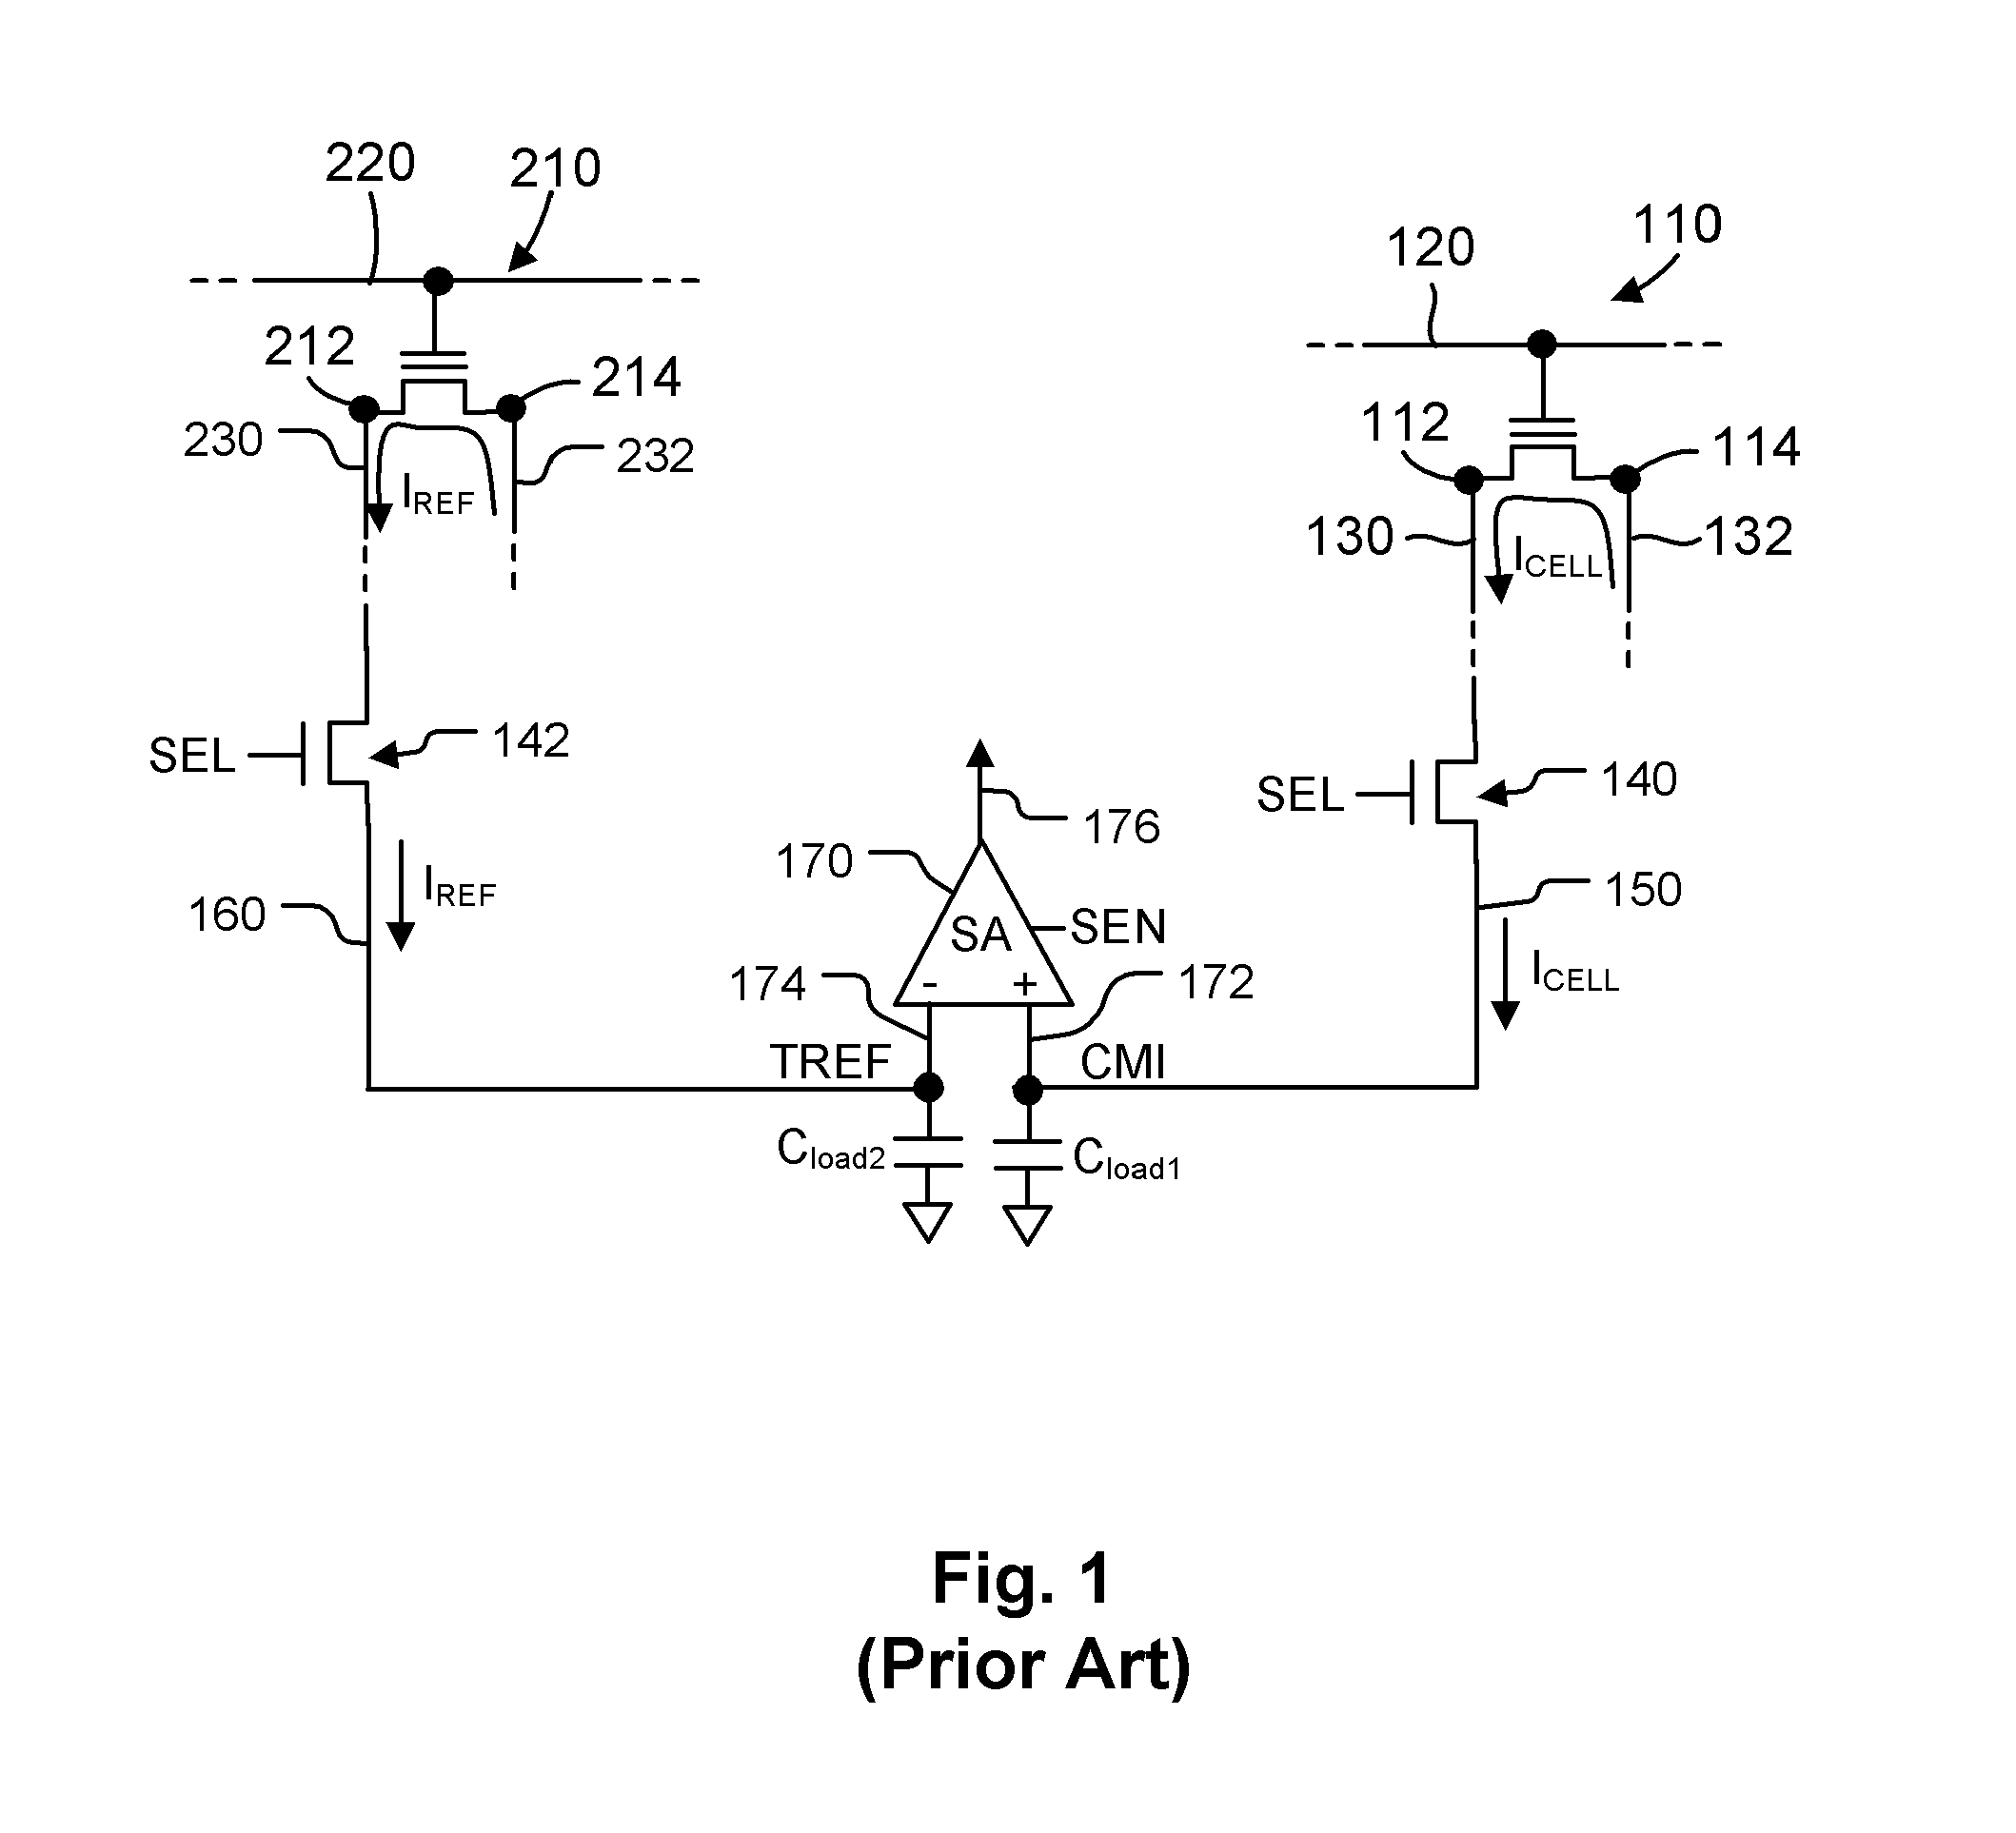 Current sink system based on sample and hold for source side sensing